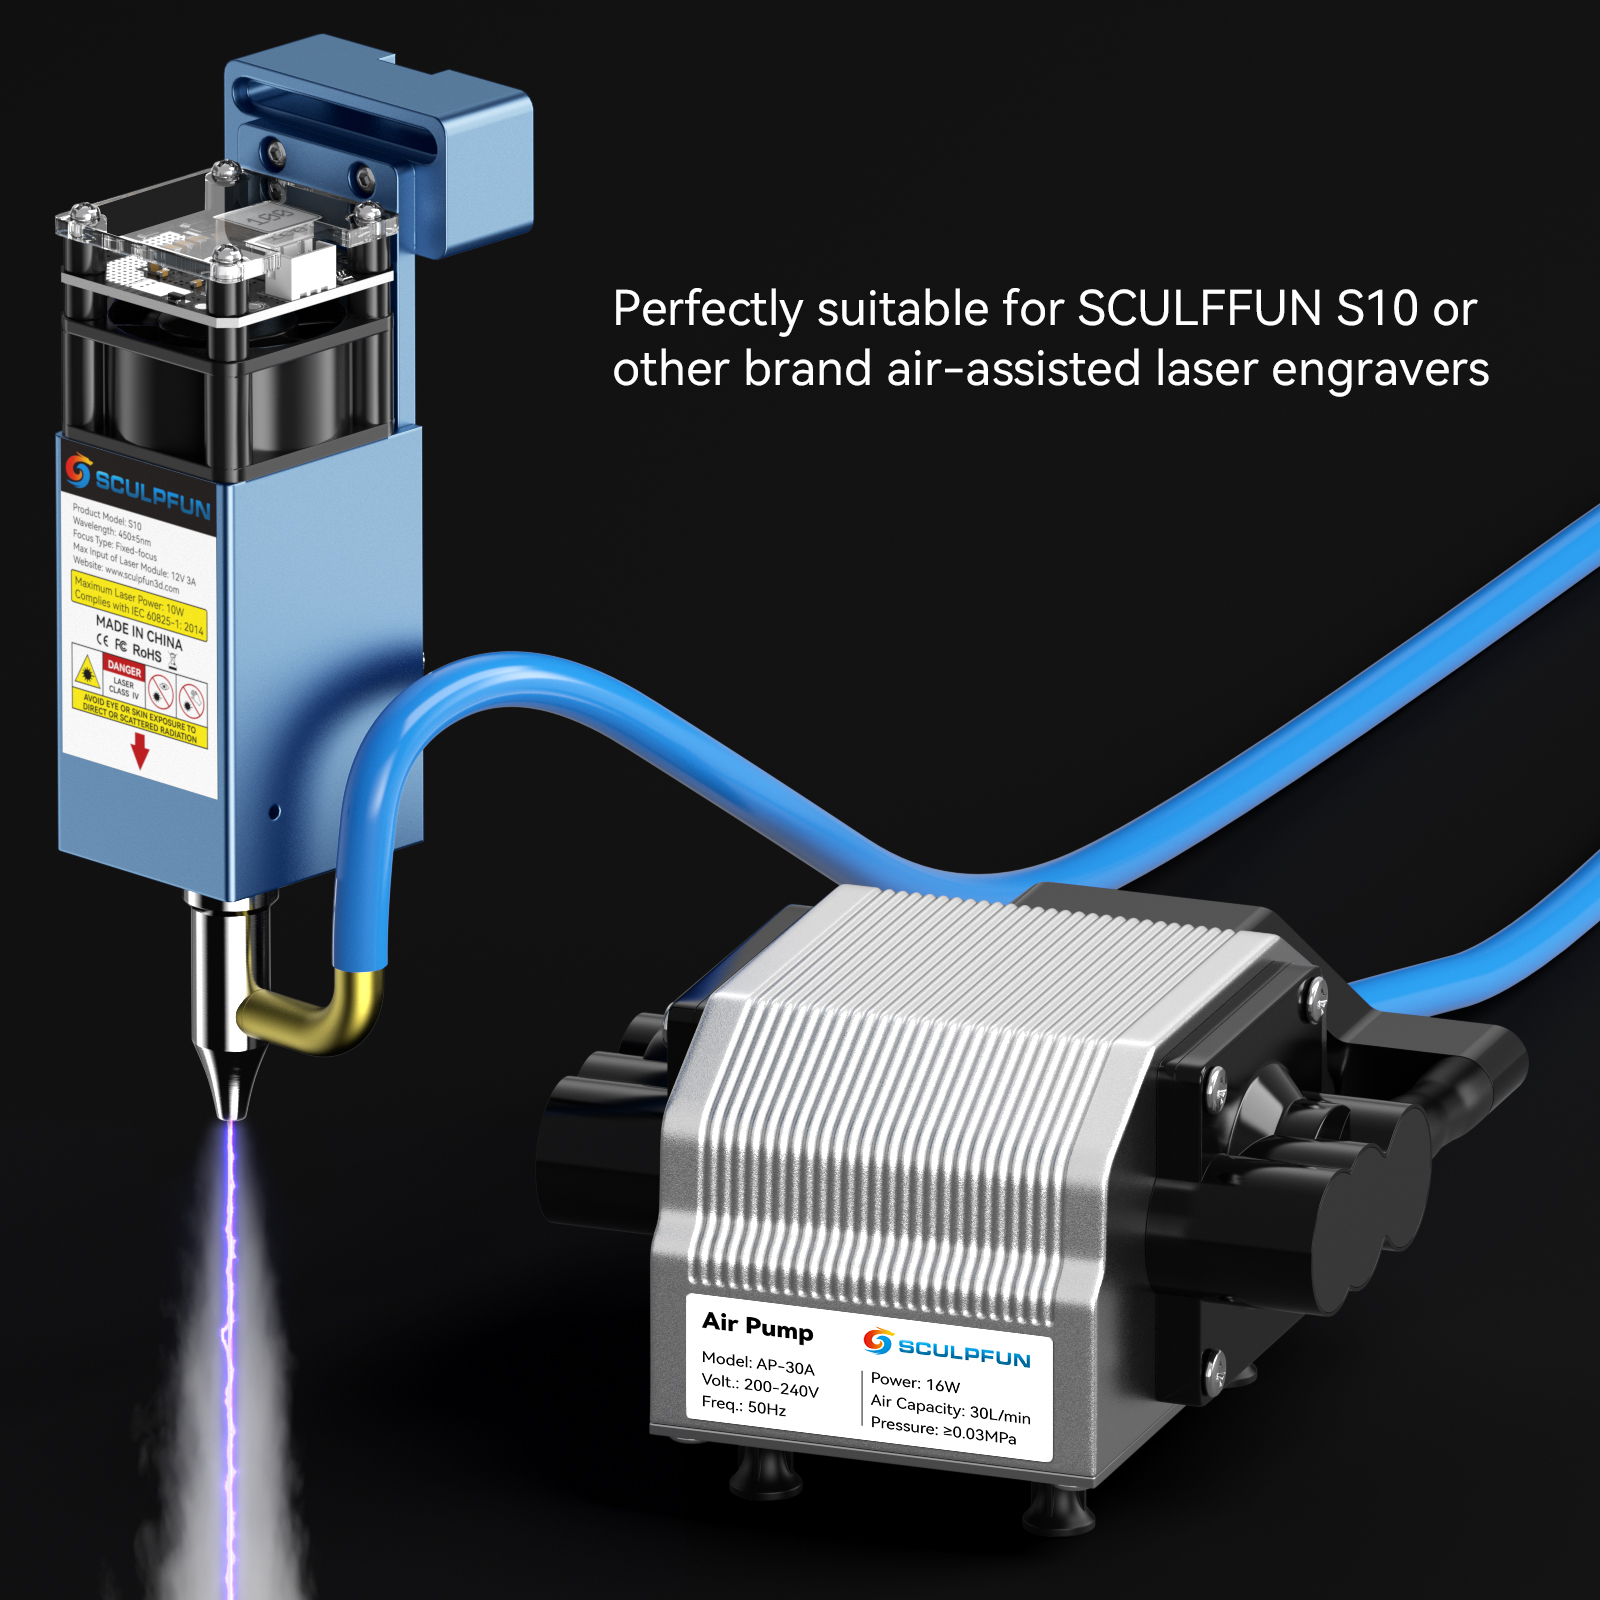 SCULPFUN-Air-Pump-Air-Compressor-220V-for-Laser-Engraving-Machine-Adjustable-Speed-Low-Noise-Low-Vib-1957800-4